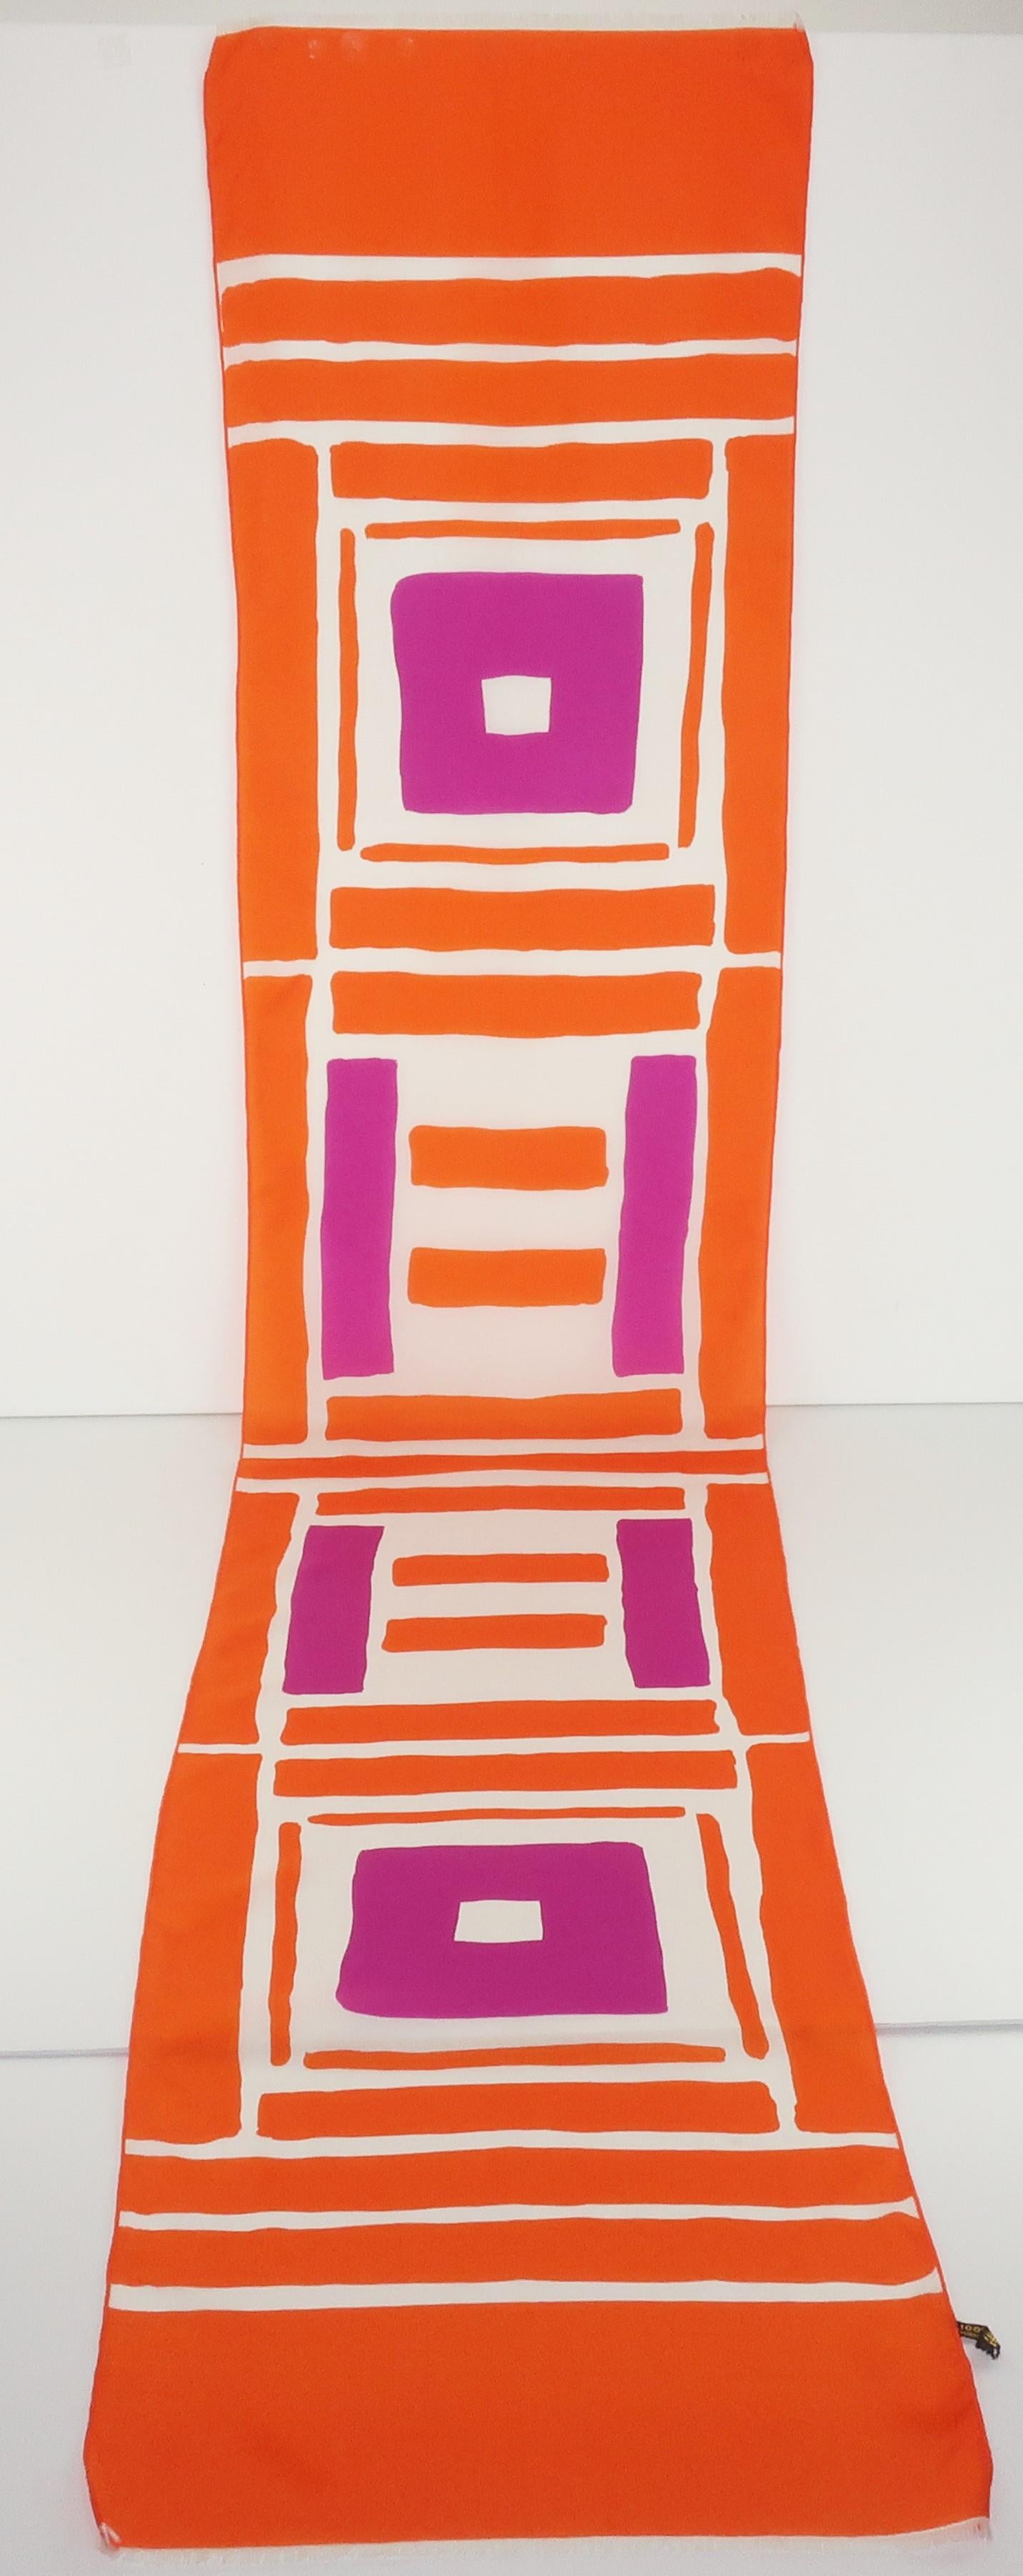 The bold geometric pattern paired with the color combination of orange, purple and white gives this French silk scarf a period perfect mod look.  The skinny long silhouette is ideal for sashing, draping and wrapping.  Marked ‘Made in France’ without